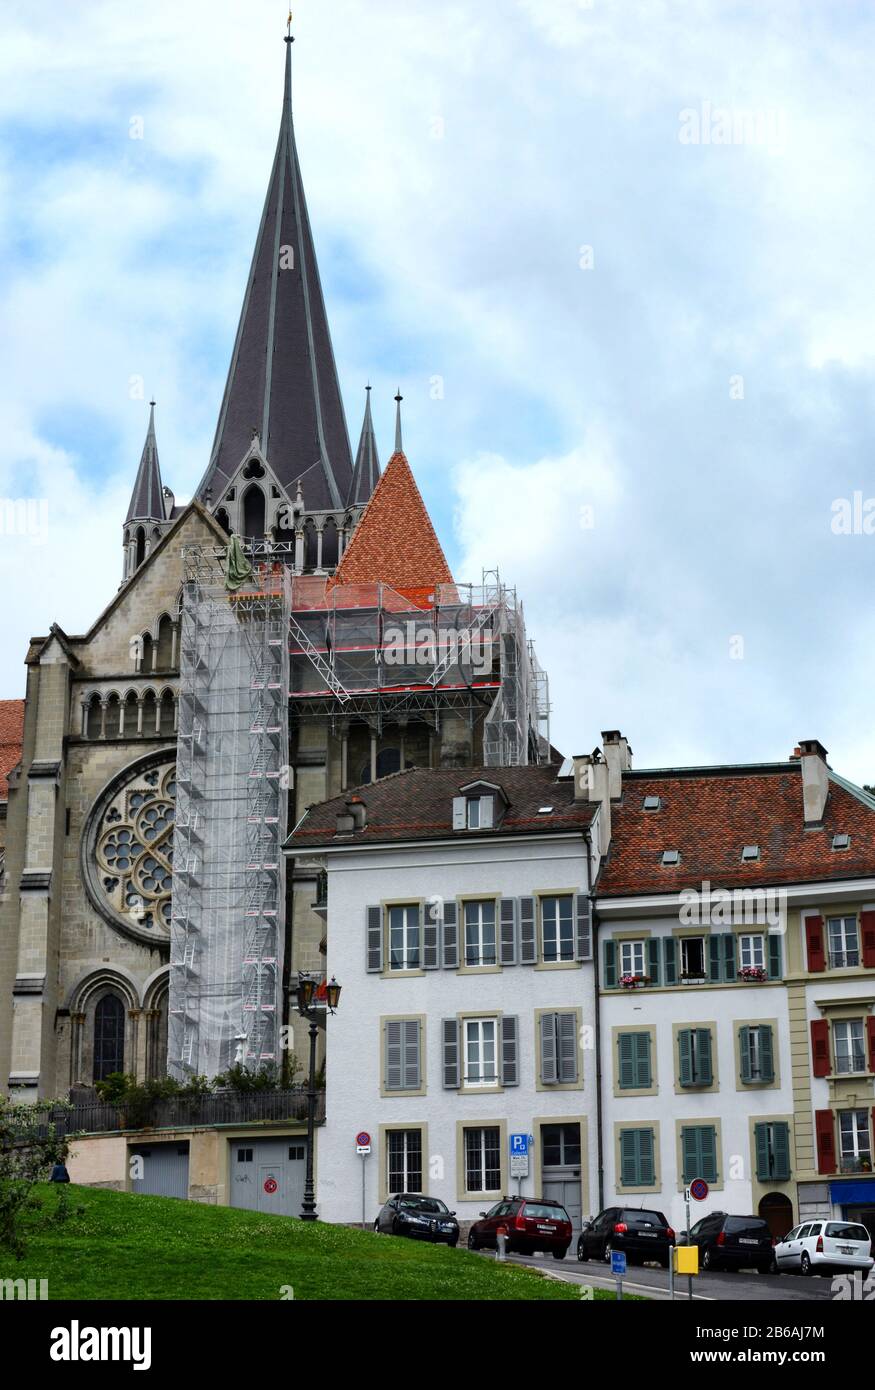 LAUSANNE, SWITZERLAND - JULY 7, 2014: The Cathedral of Notre Dame of Lausanne. The Cathedral is currently undergoing renovation and is partially cover Stock Photo